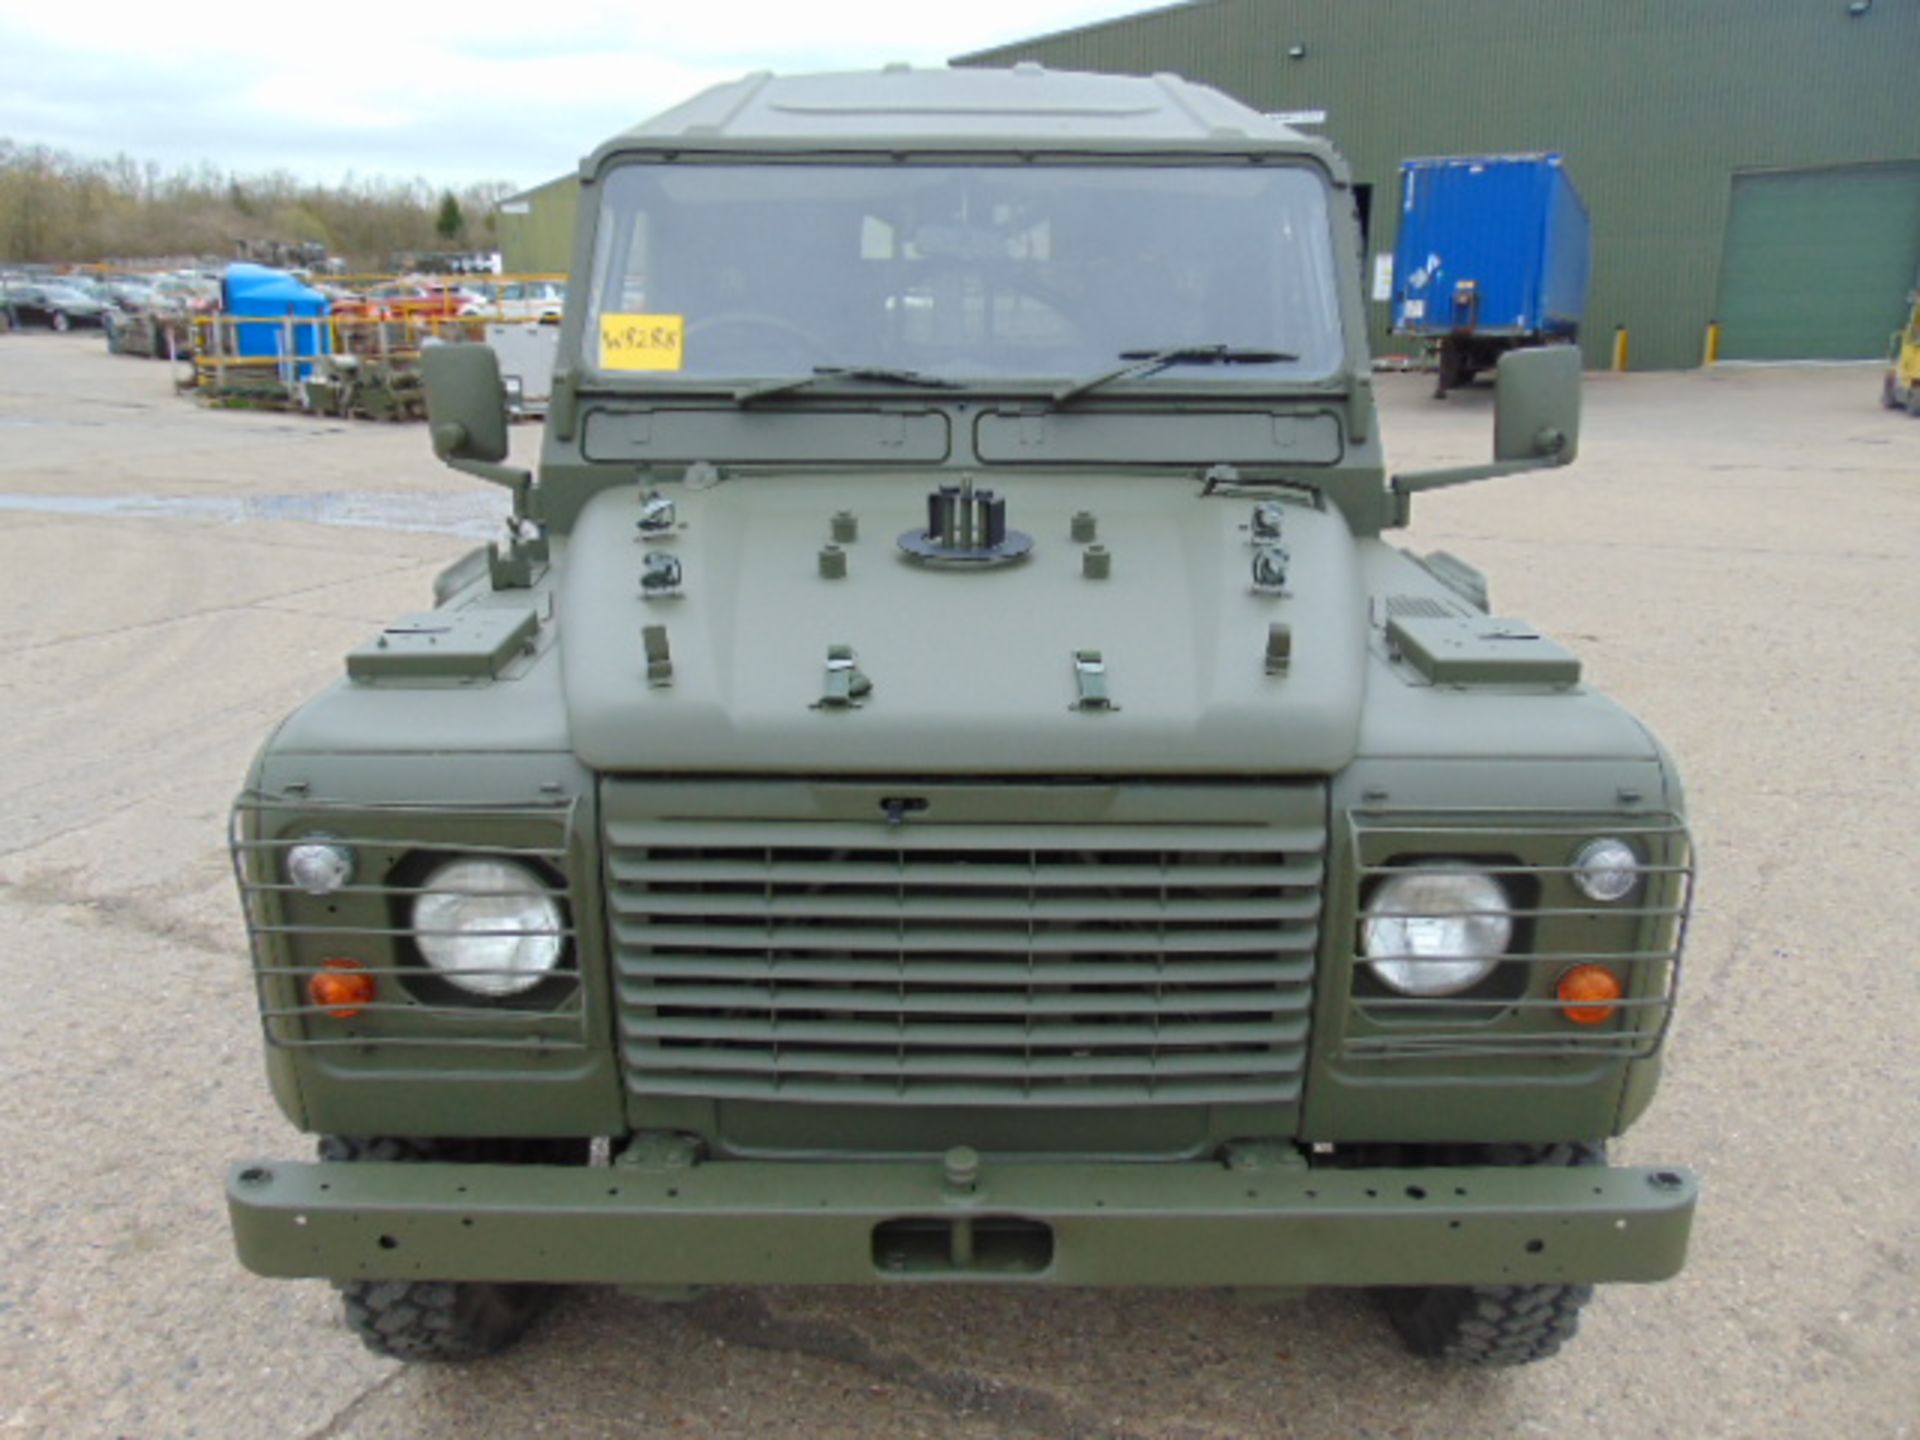 Military Specification Land Rover Wolf 110 Hard Top - Image 2 of 25